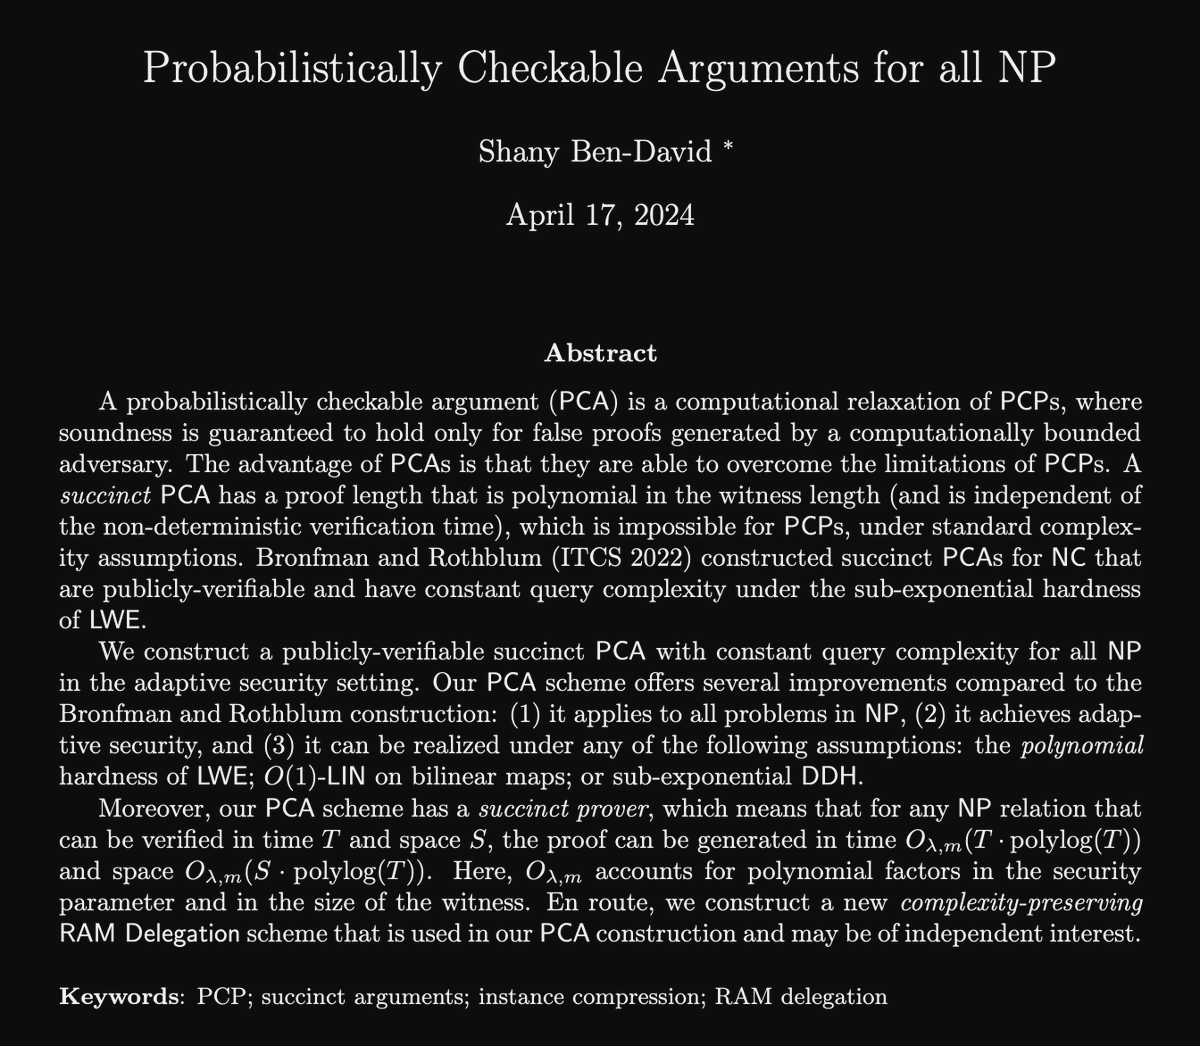 'A probabilistically checkable argument (PCA) is a computational relaxation of PCPs, where soundness is guaranteed to hold only for false proofs generated by a computationally bounded adversary. The advantage of PCAs is that they are able to overcome the limitations of PCPs.' 1/7